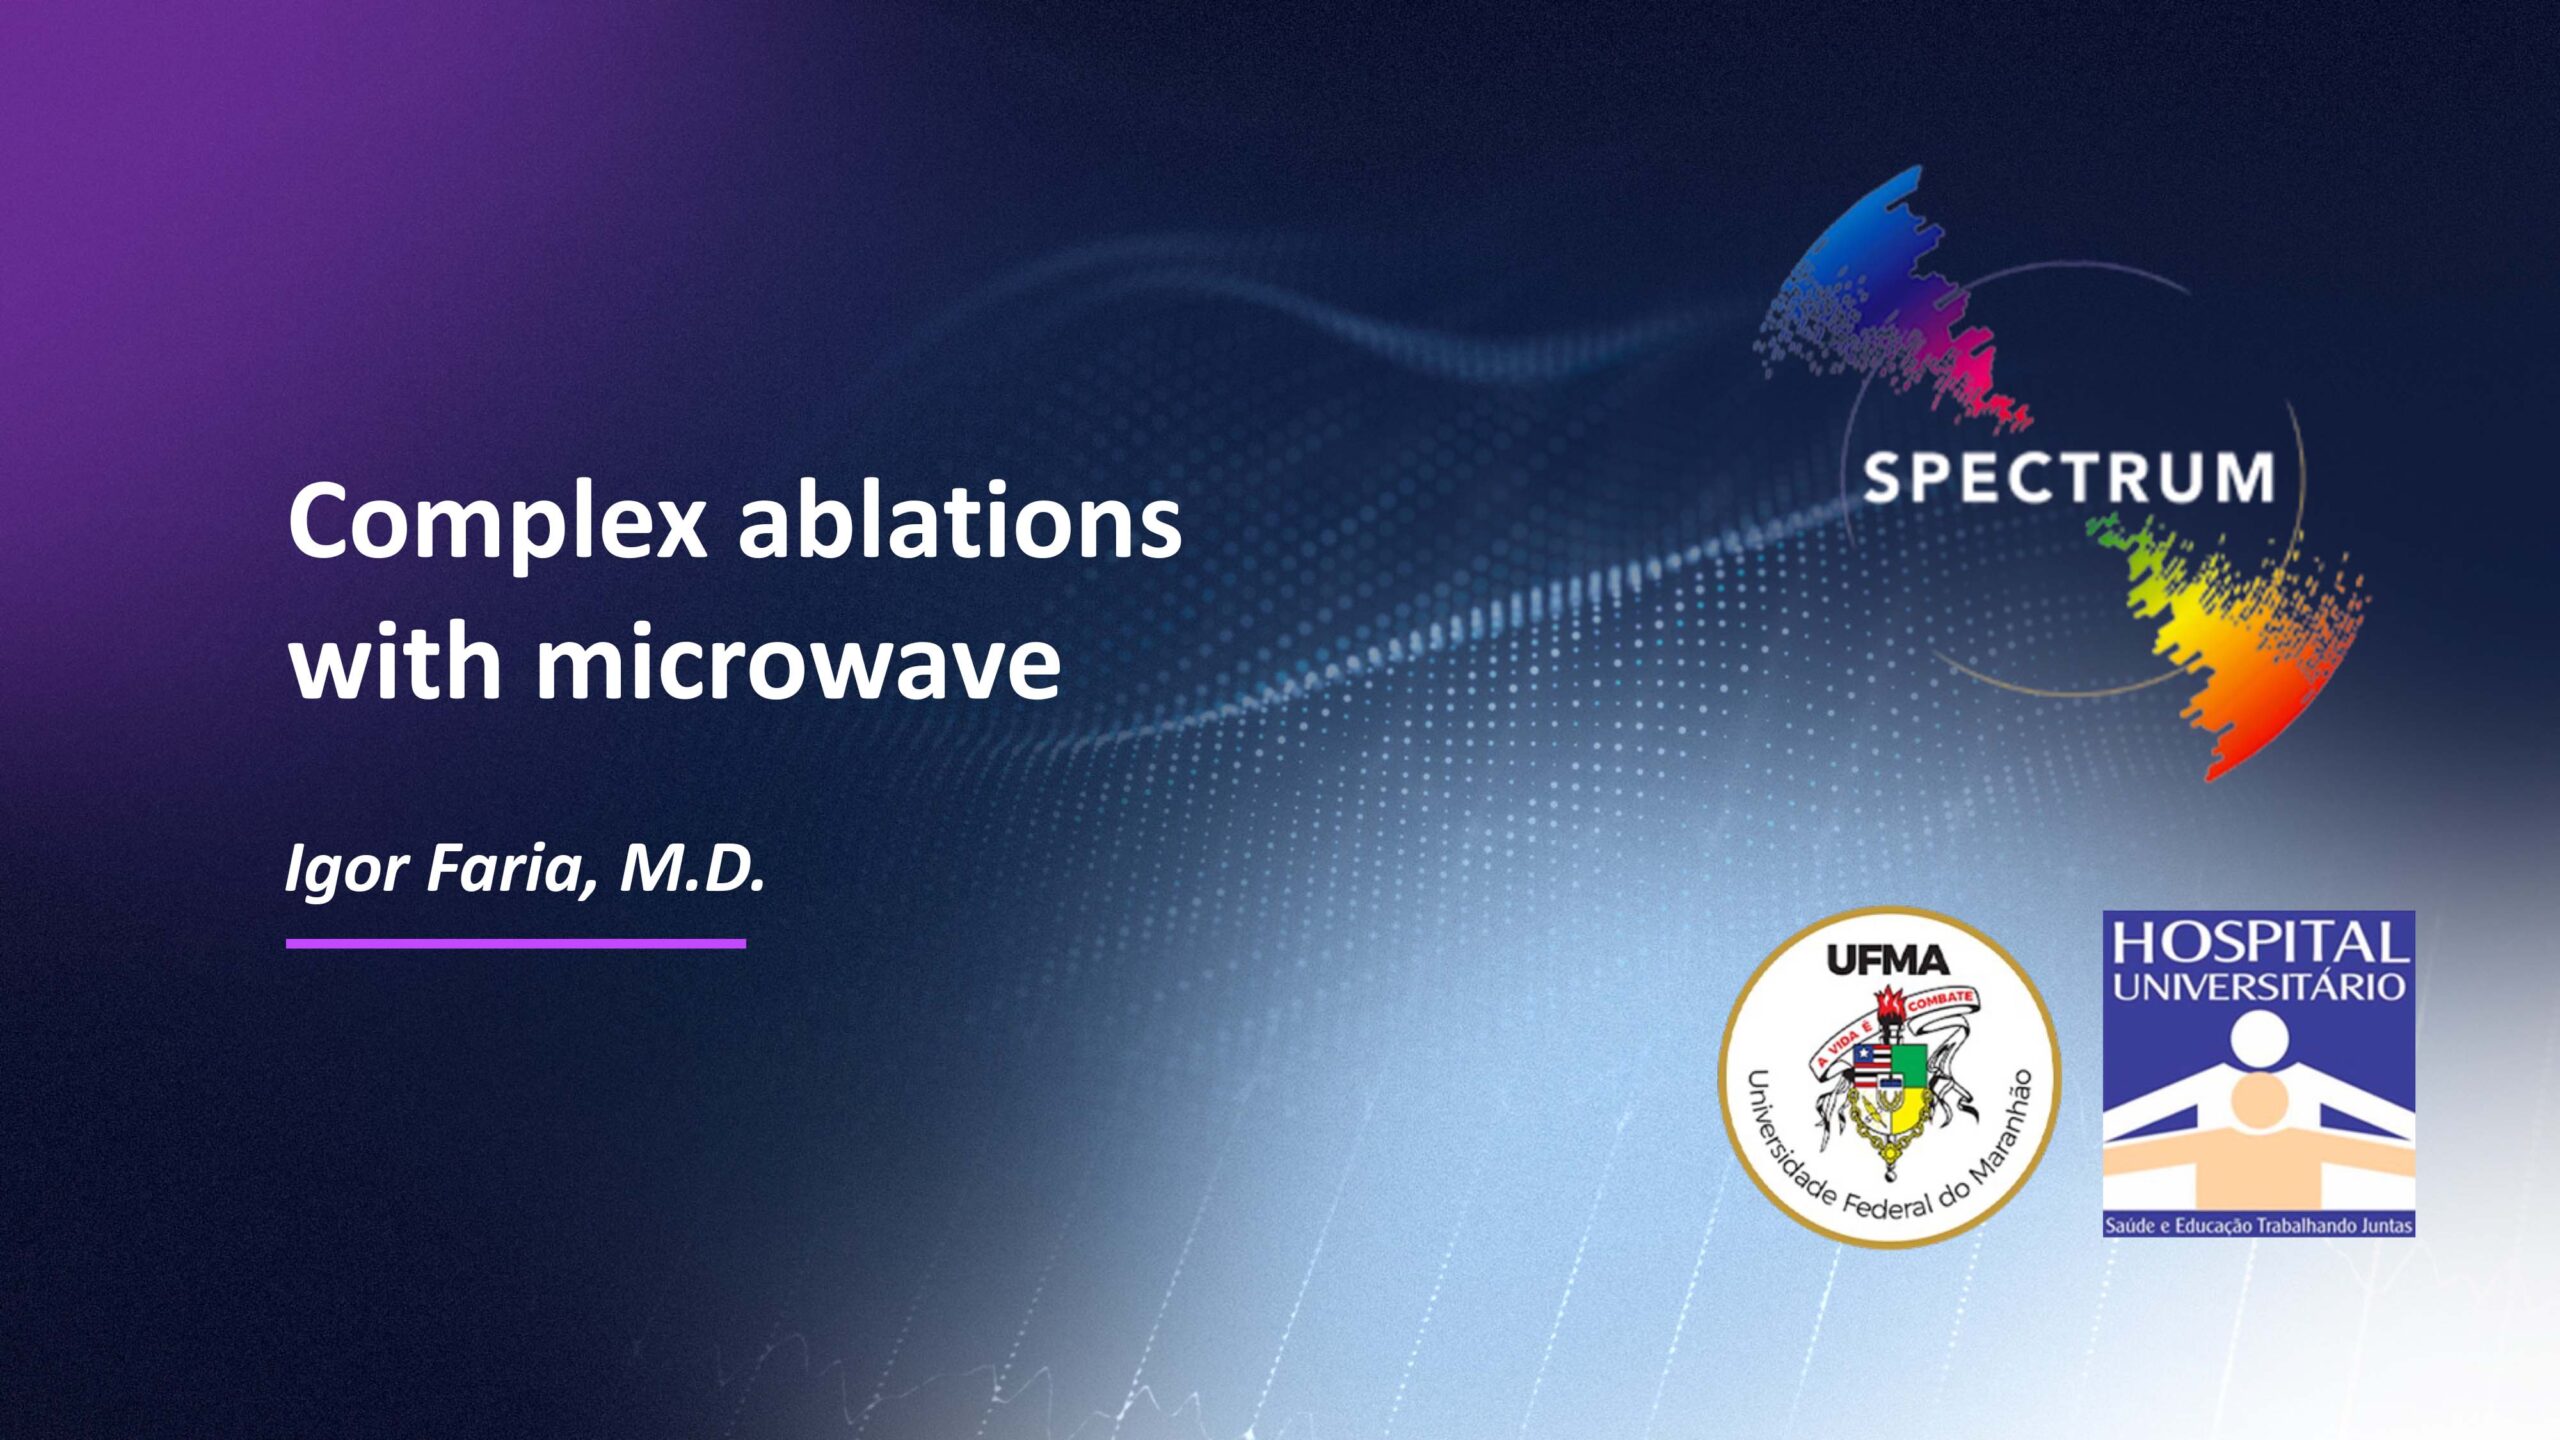 Complex ablations with microwave